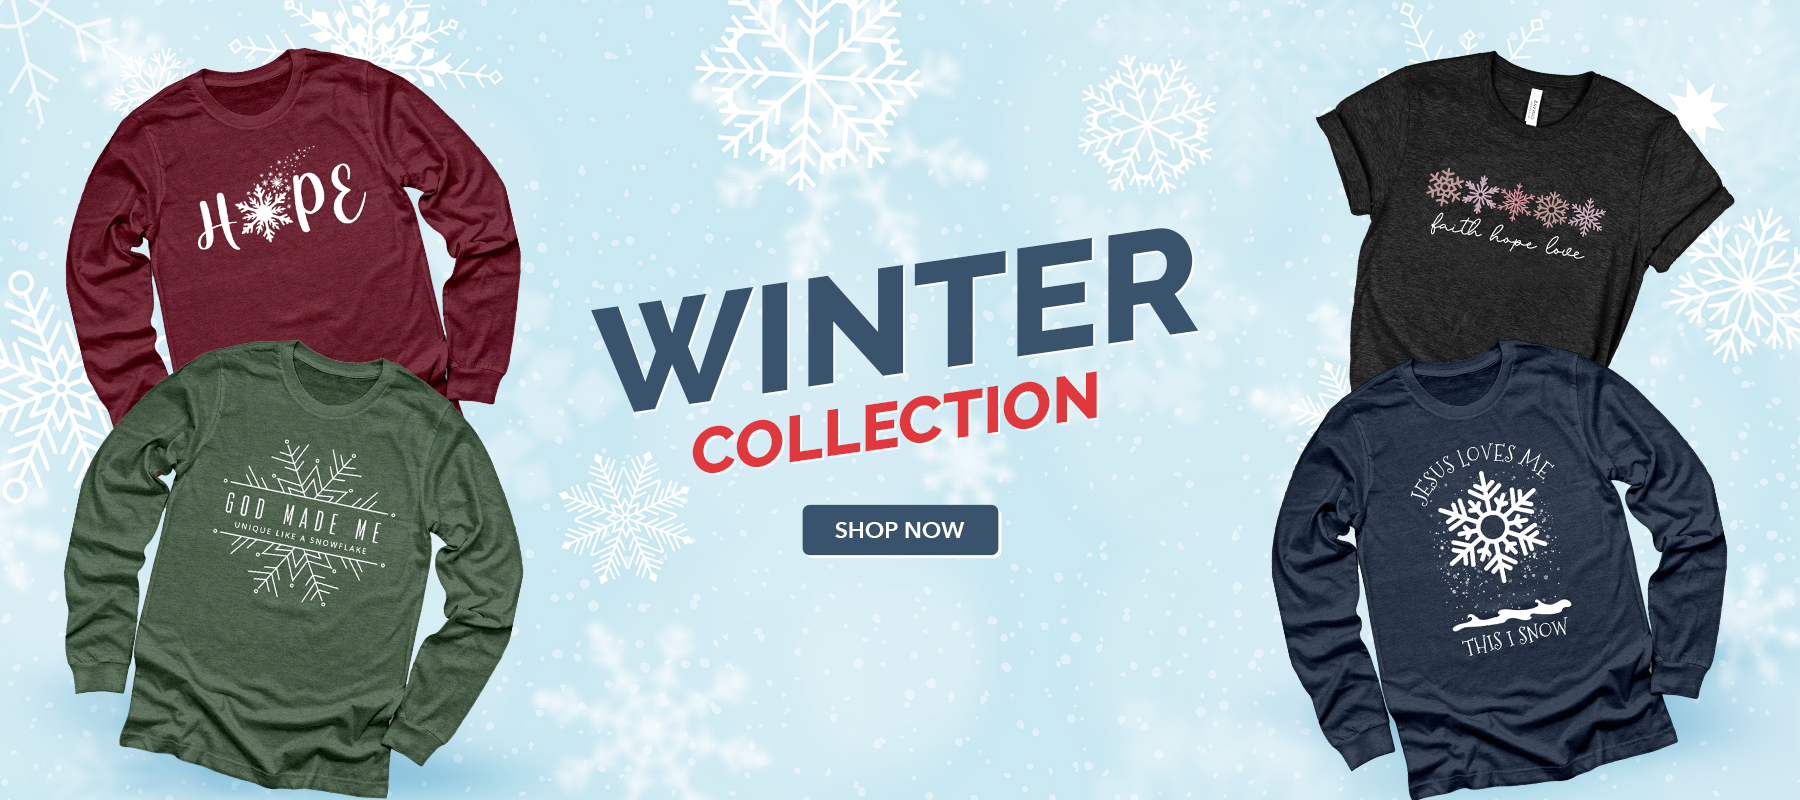 Winter Tee Collection!